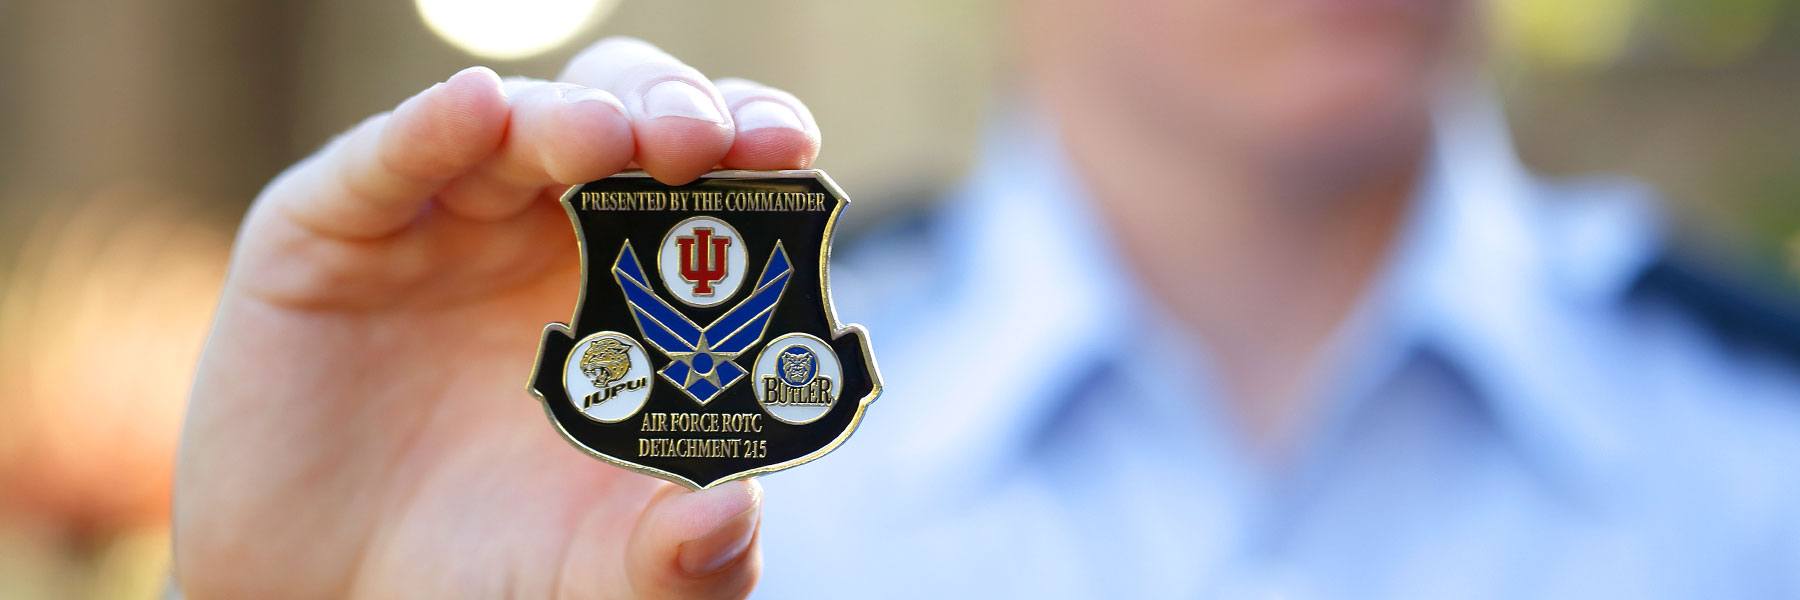 Cadet holding the Air Force ROTC Detachment 215 coin